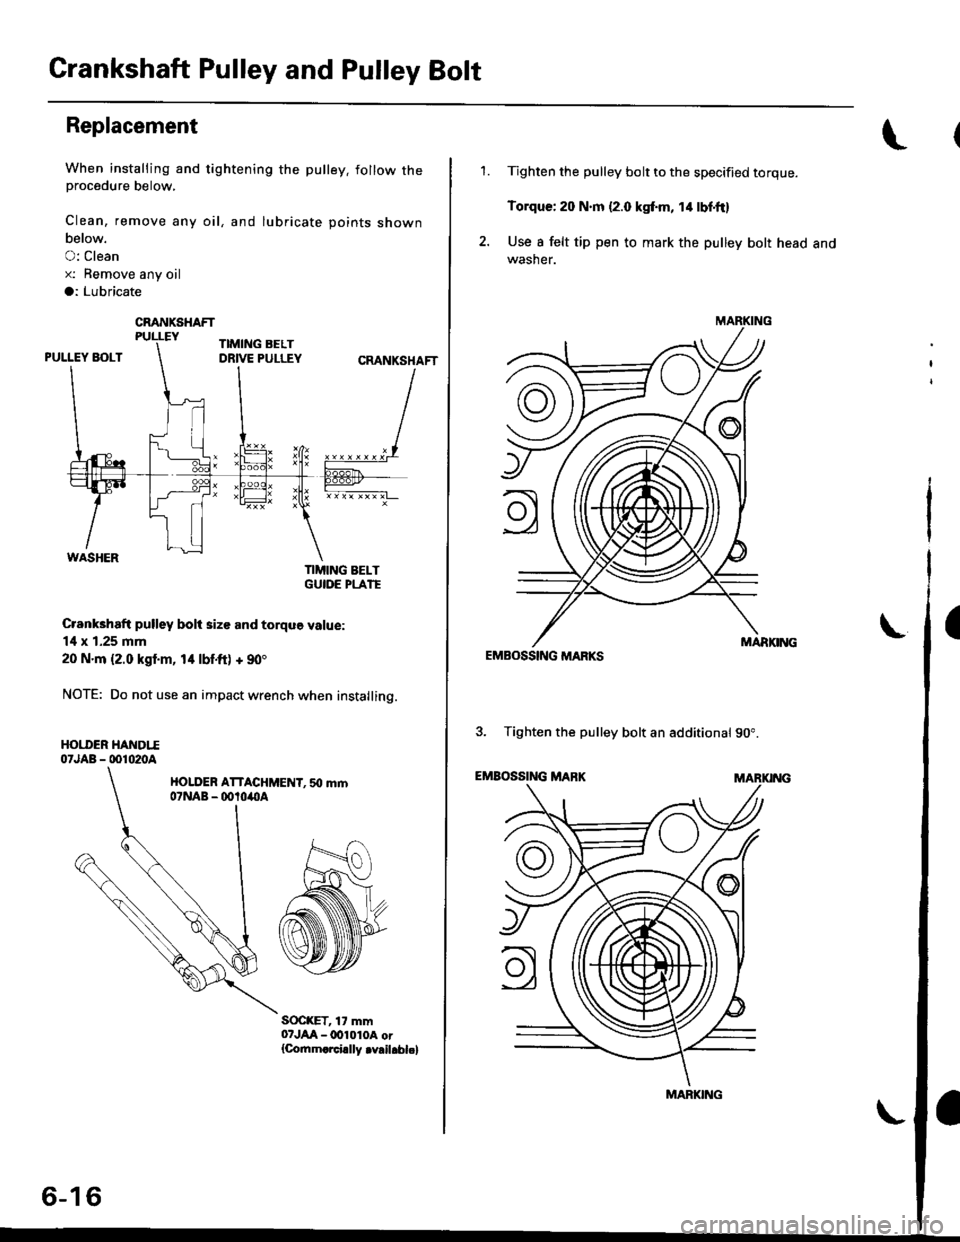 HONDA CIVIC 1997 6.G Workshop Manual Crankshaft Pulley and Pulley Bolt
Replacement
When installing and tightening the pulley. follow theprocedure below,
Clean, remove any oil, and lubricate points shown
below.
O: Clean
x: Bemove any oil
